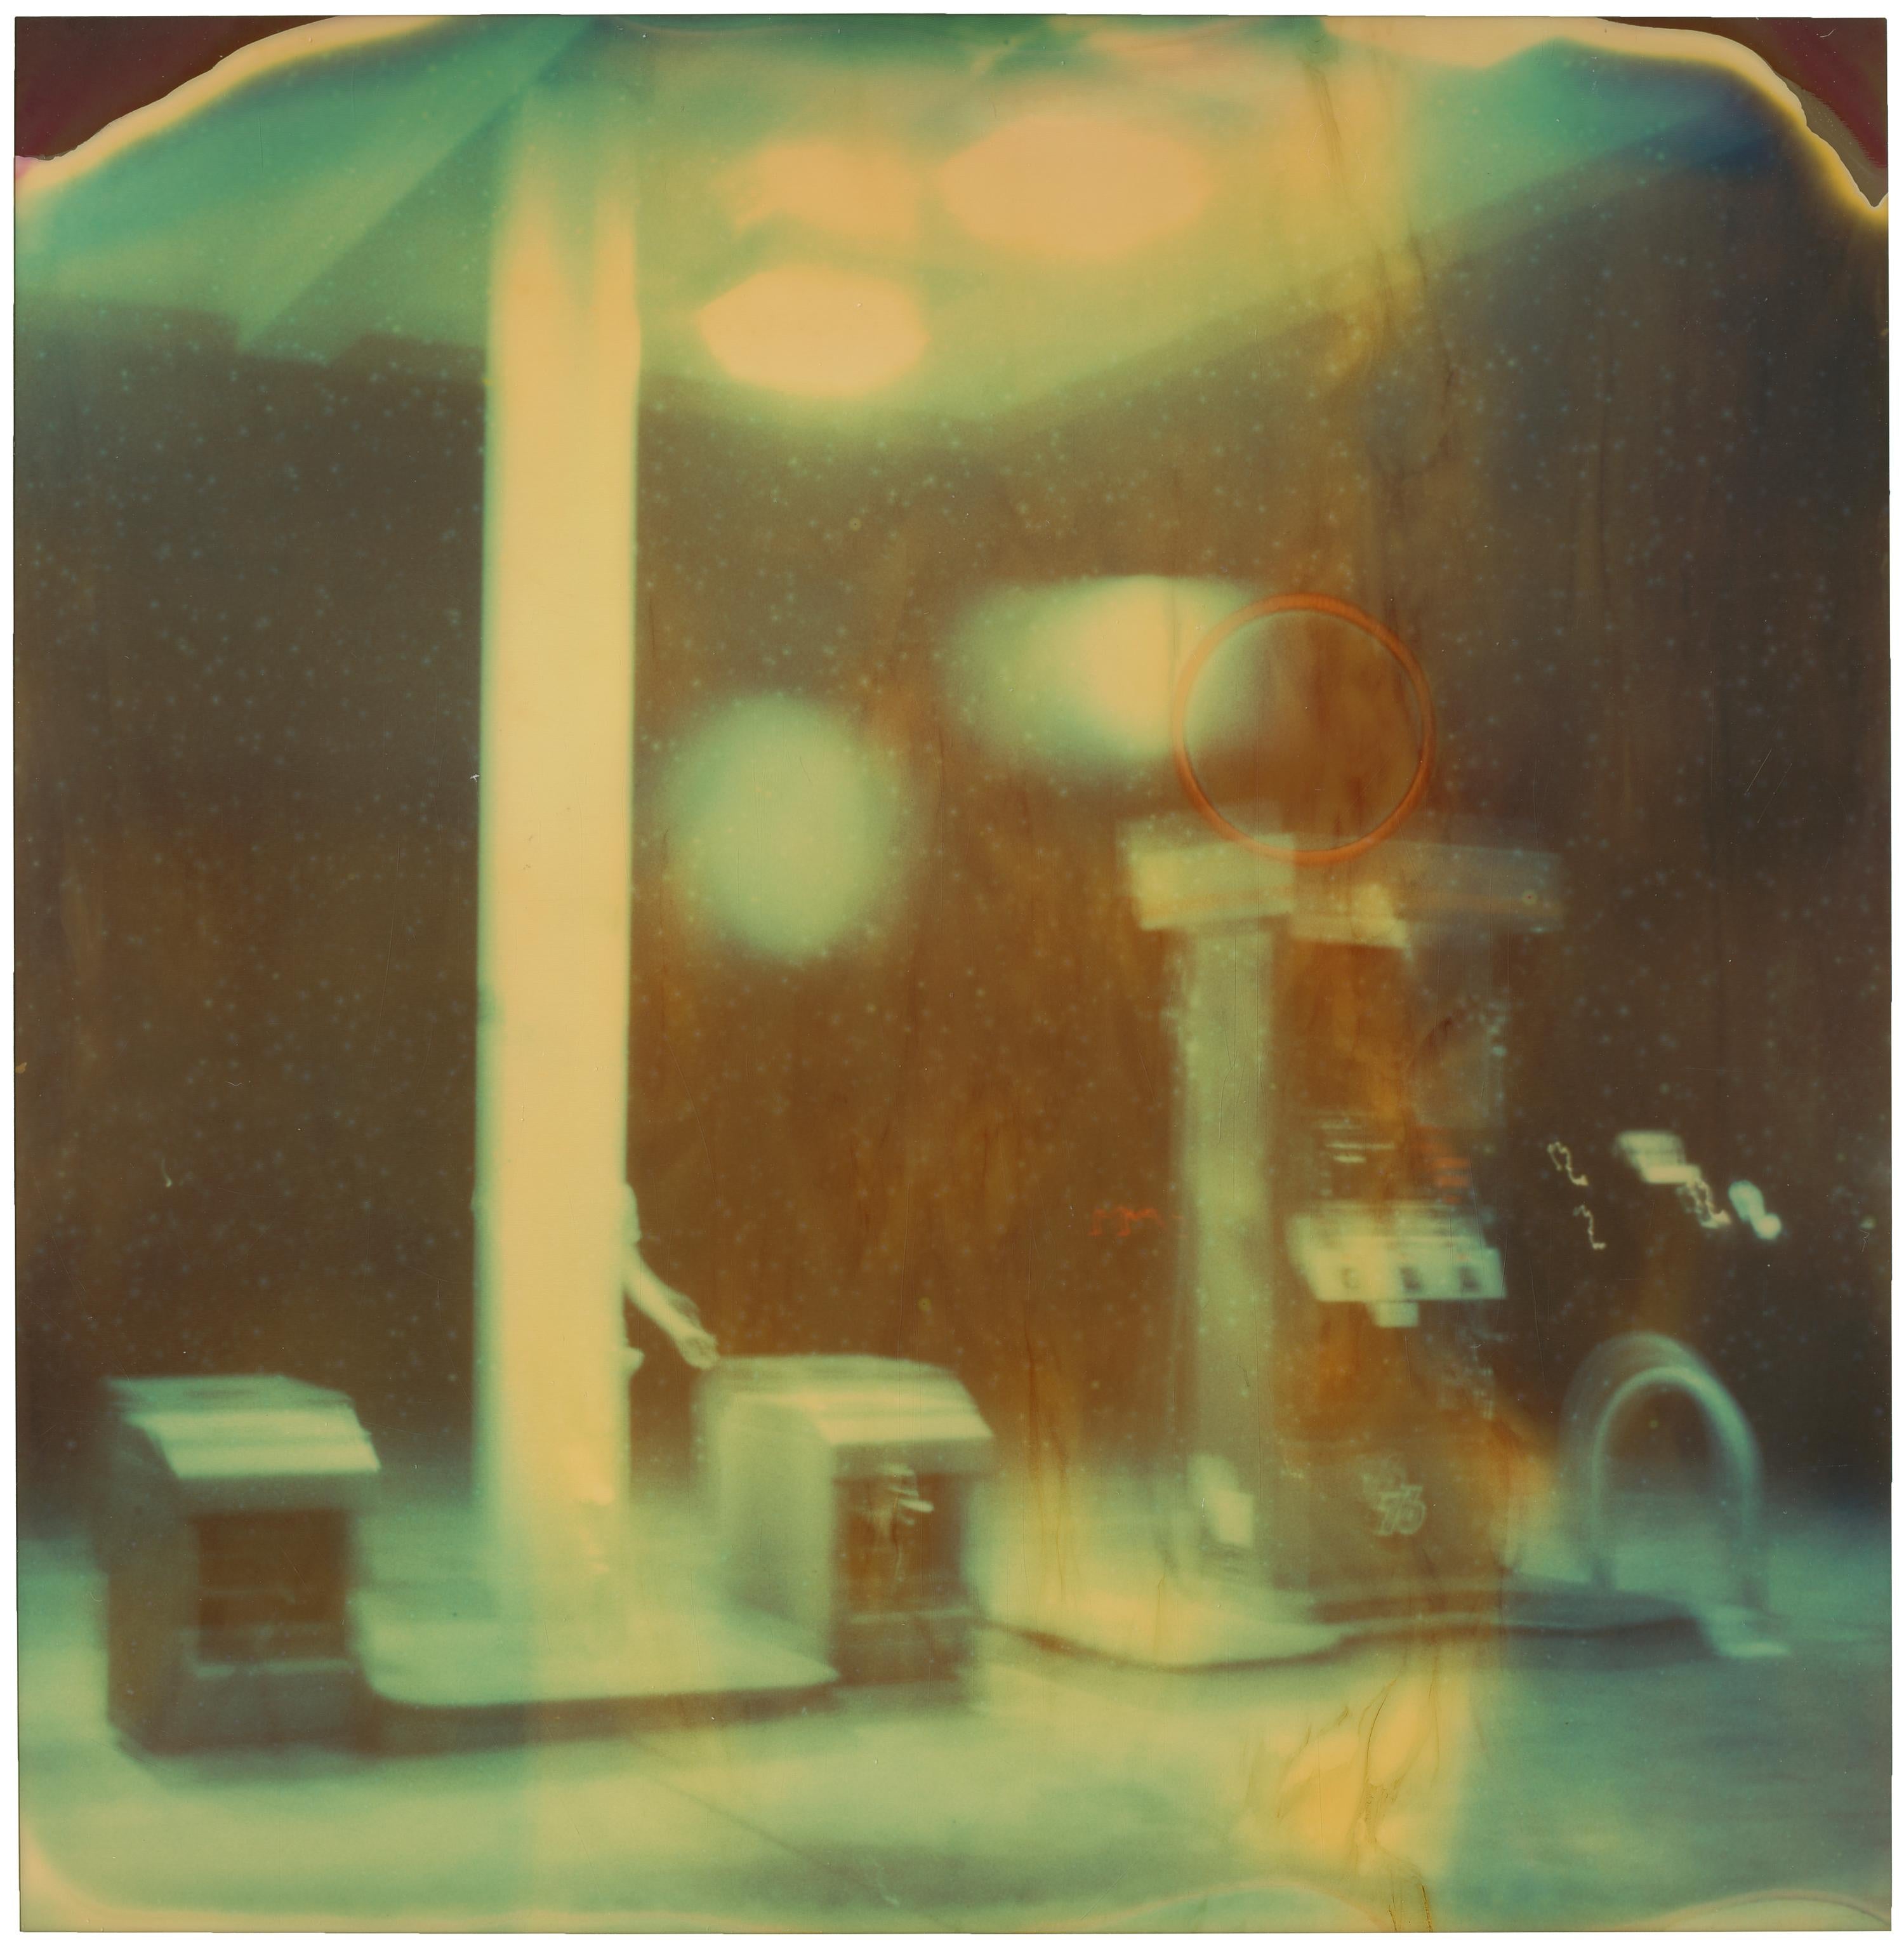 Gasstation at Night  (Stranger than Paradise) - 4 pieces, analog, mounted - Contemporary Photograph by Stefanie Schneider